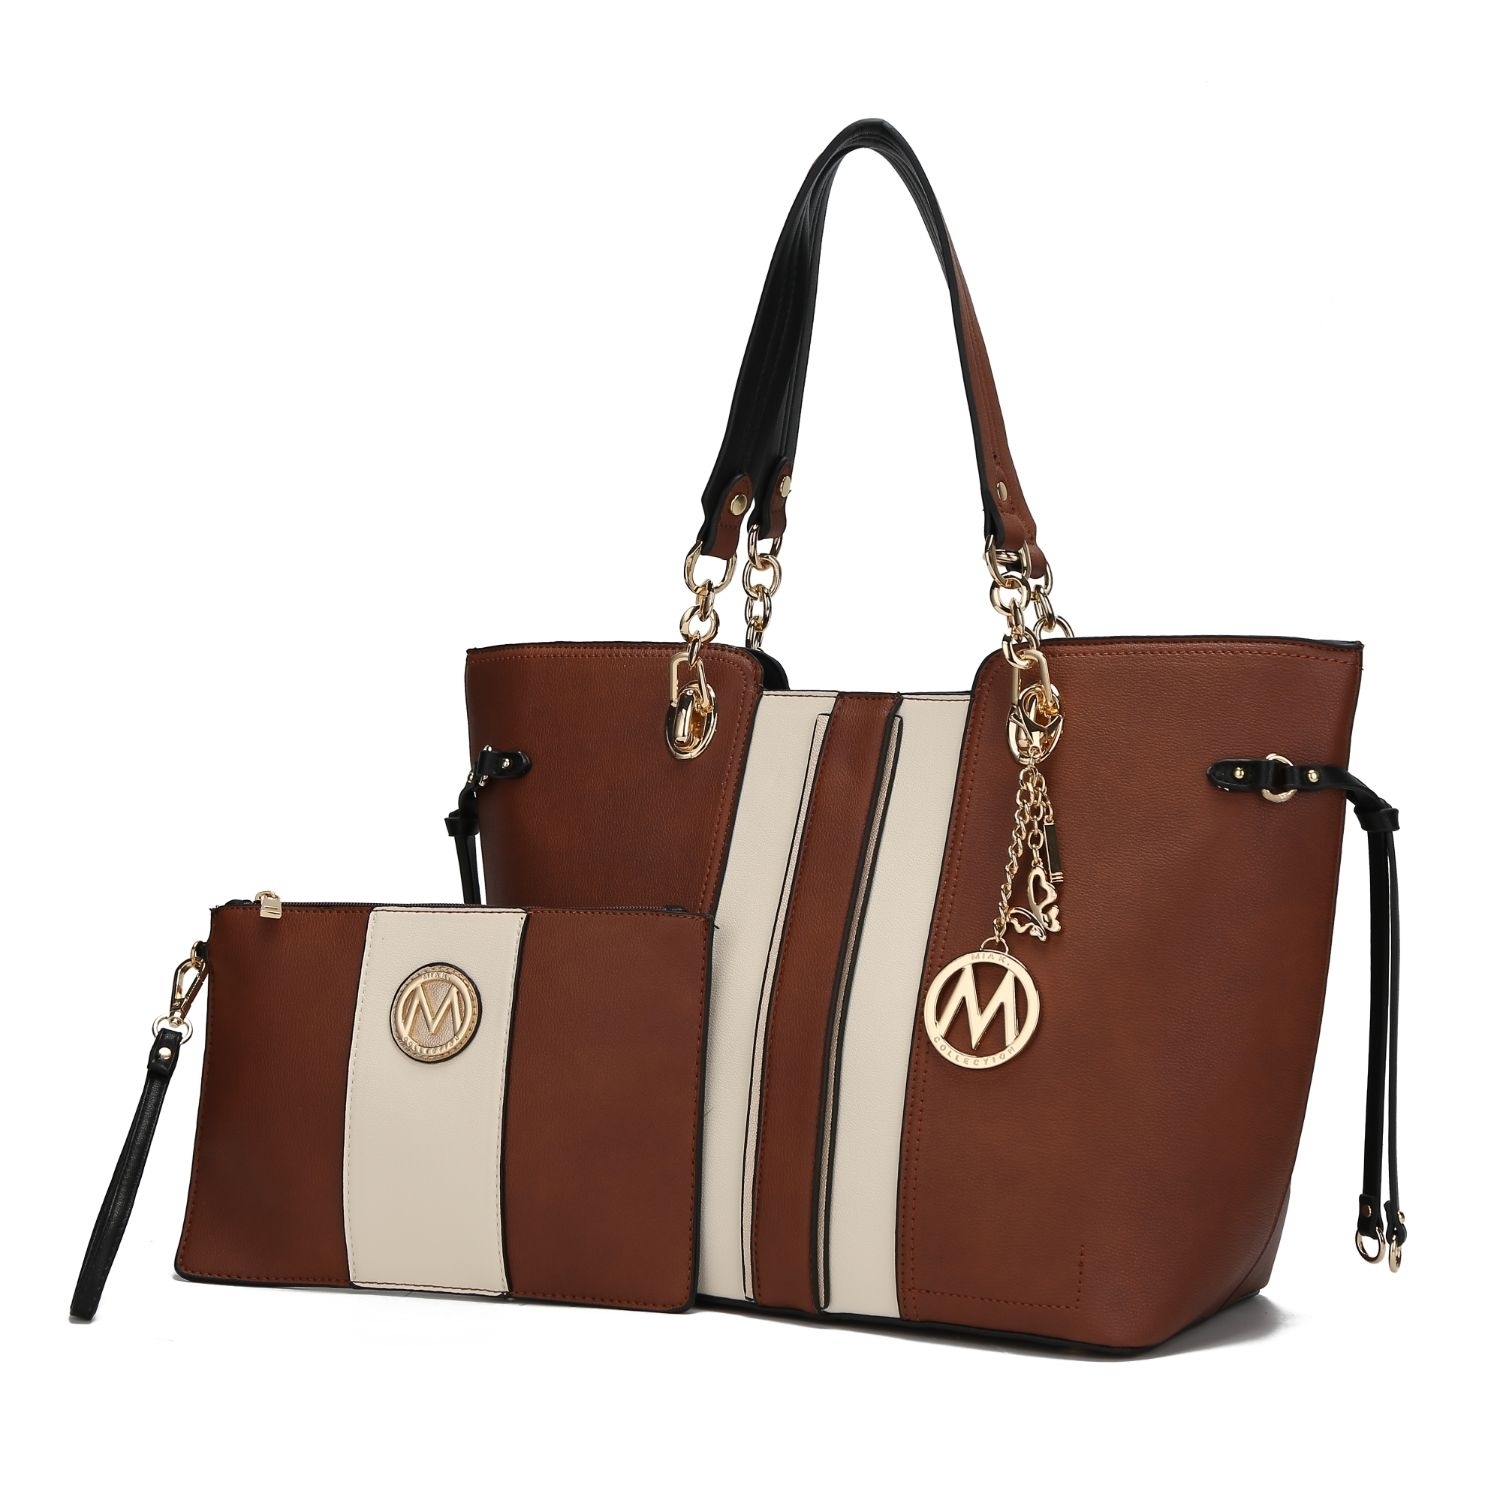 MKF Collection Holland Tote Handbag With Wristlet - 2Psc By Mia K. - Cognac Brown